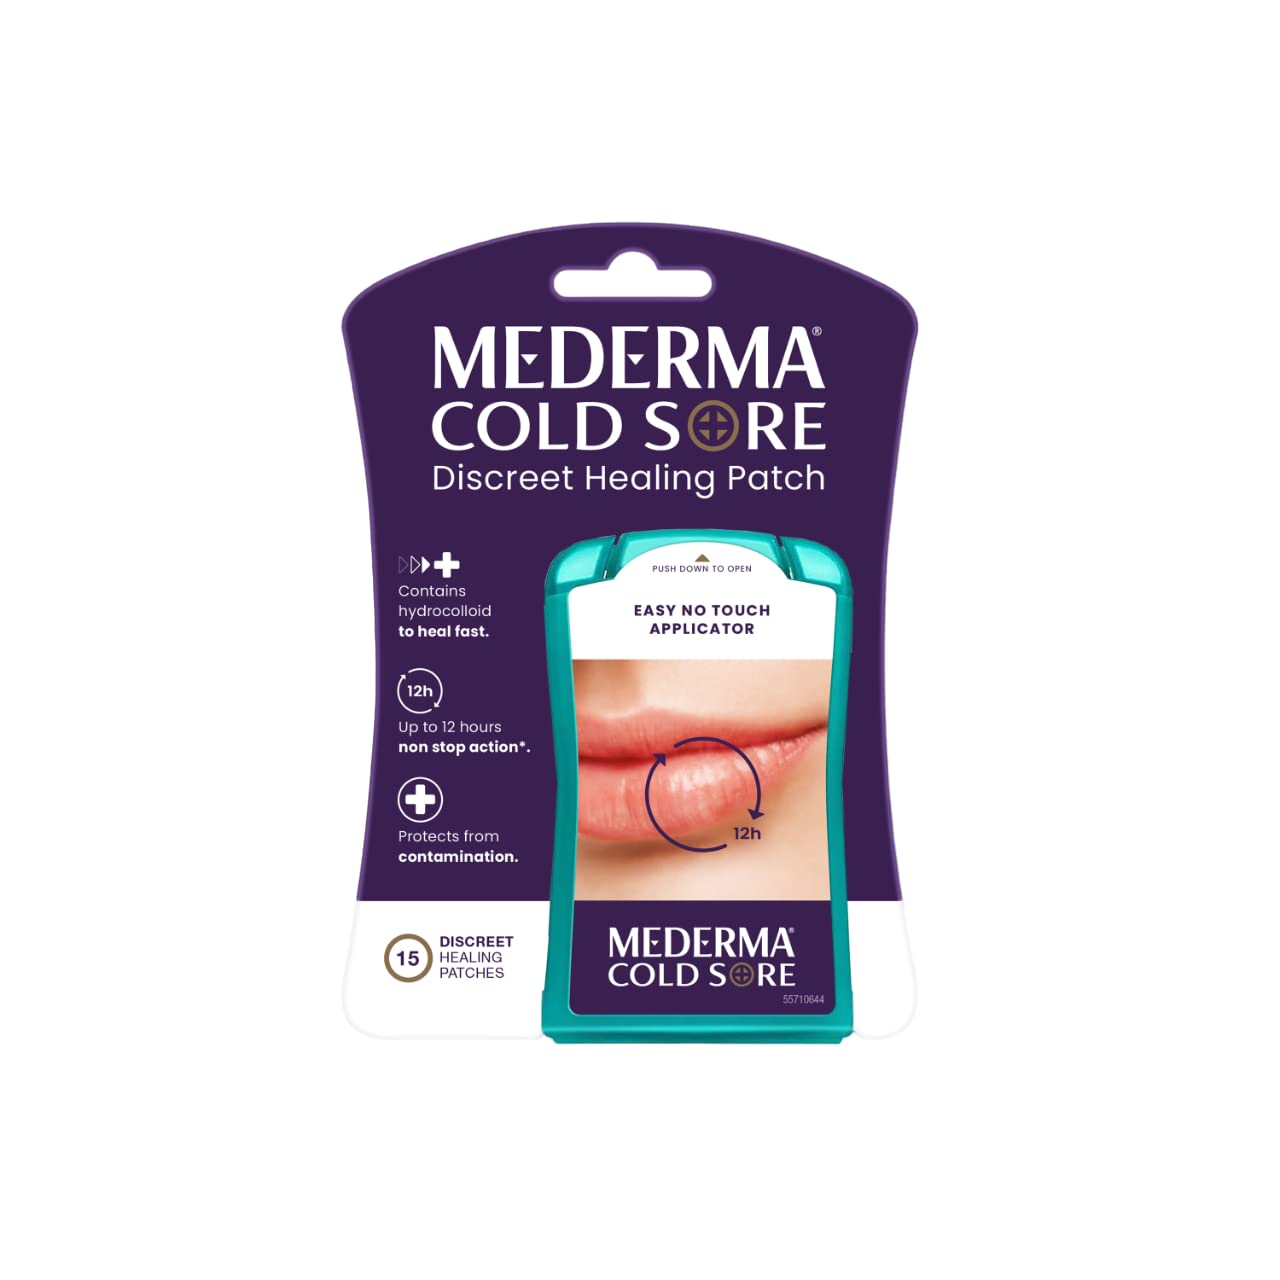 Mederma Cold Sore Discreet Healing Patch - A Patch That Protects and conceals Cold Sores - 15 Count